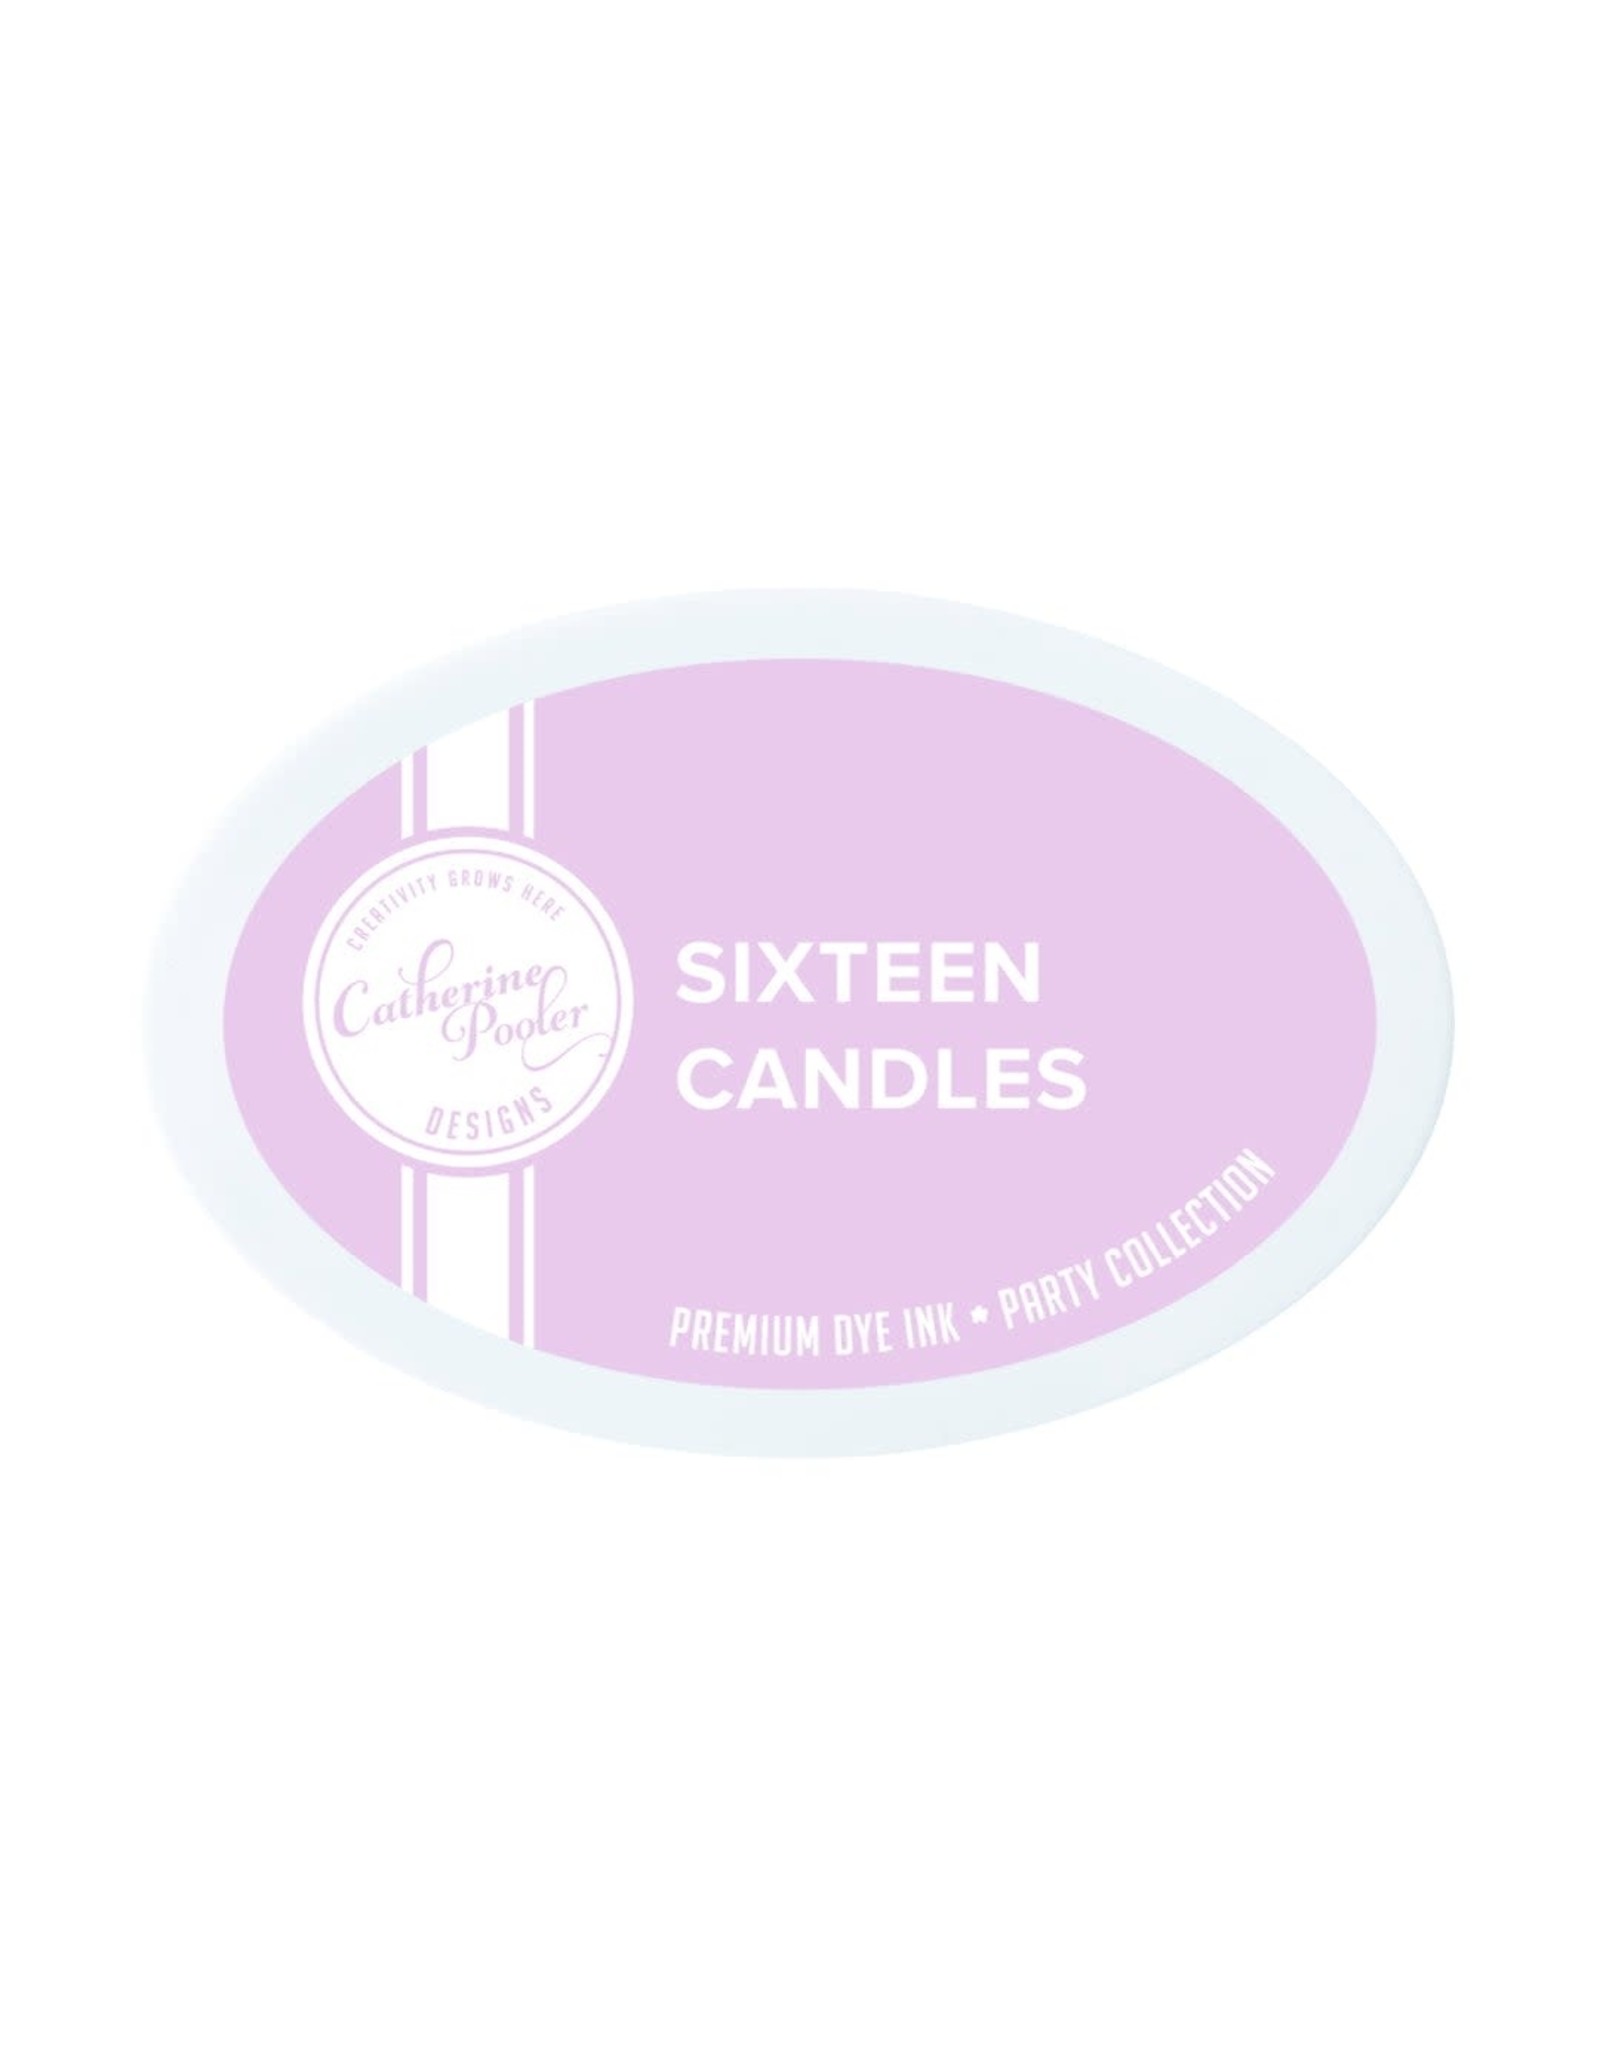 Catherine Pooler Designs Sixteen Candles Ink Pad